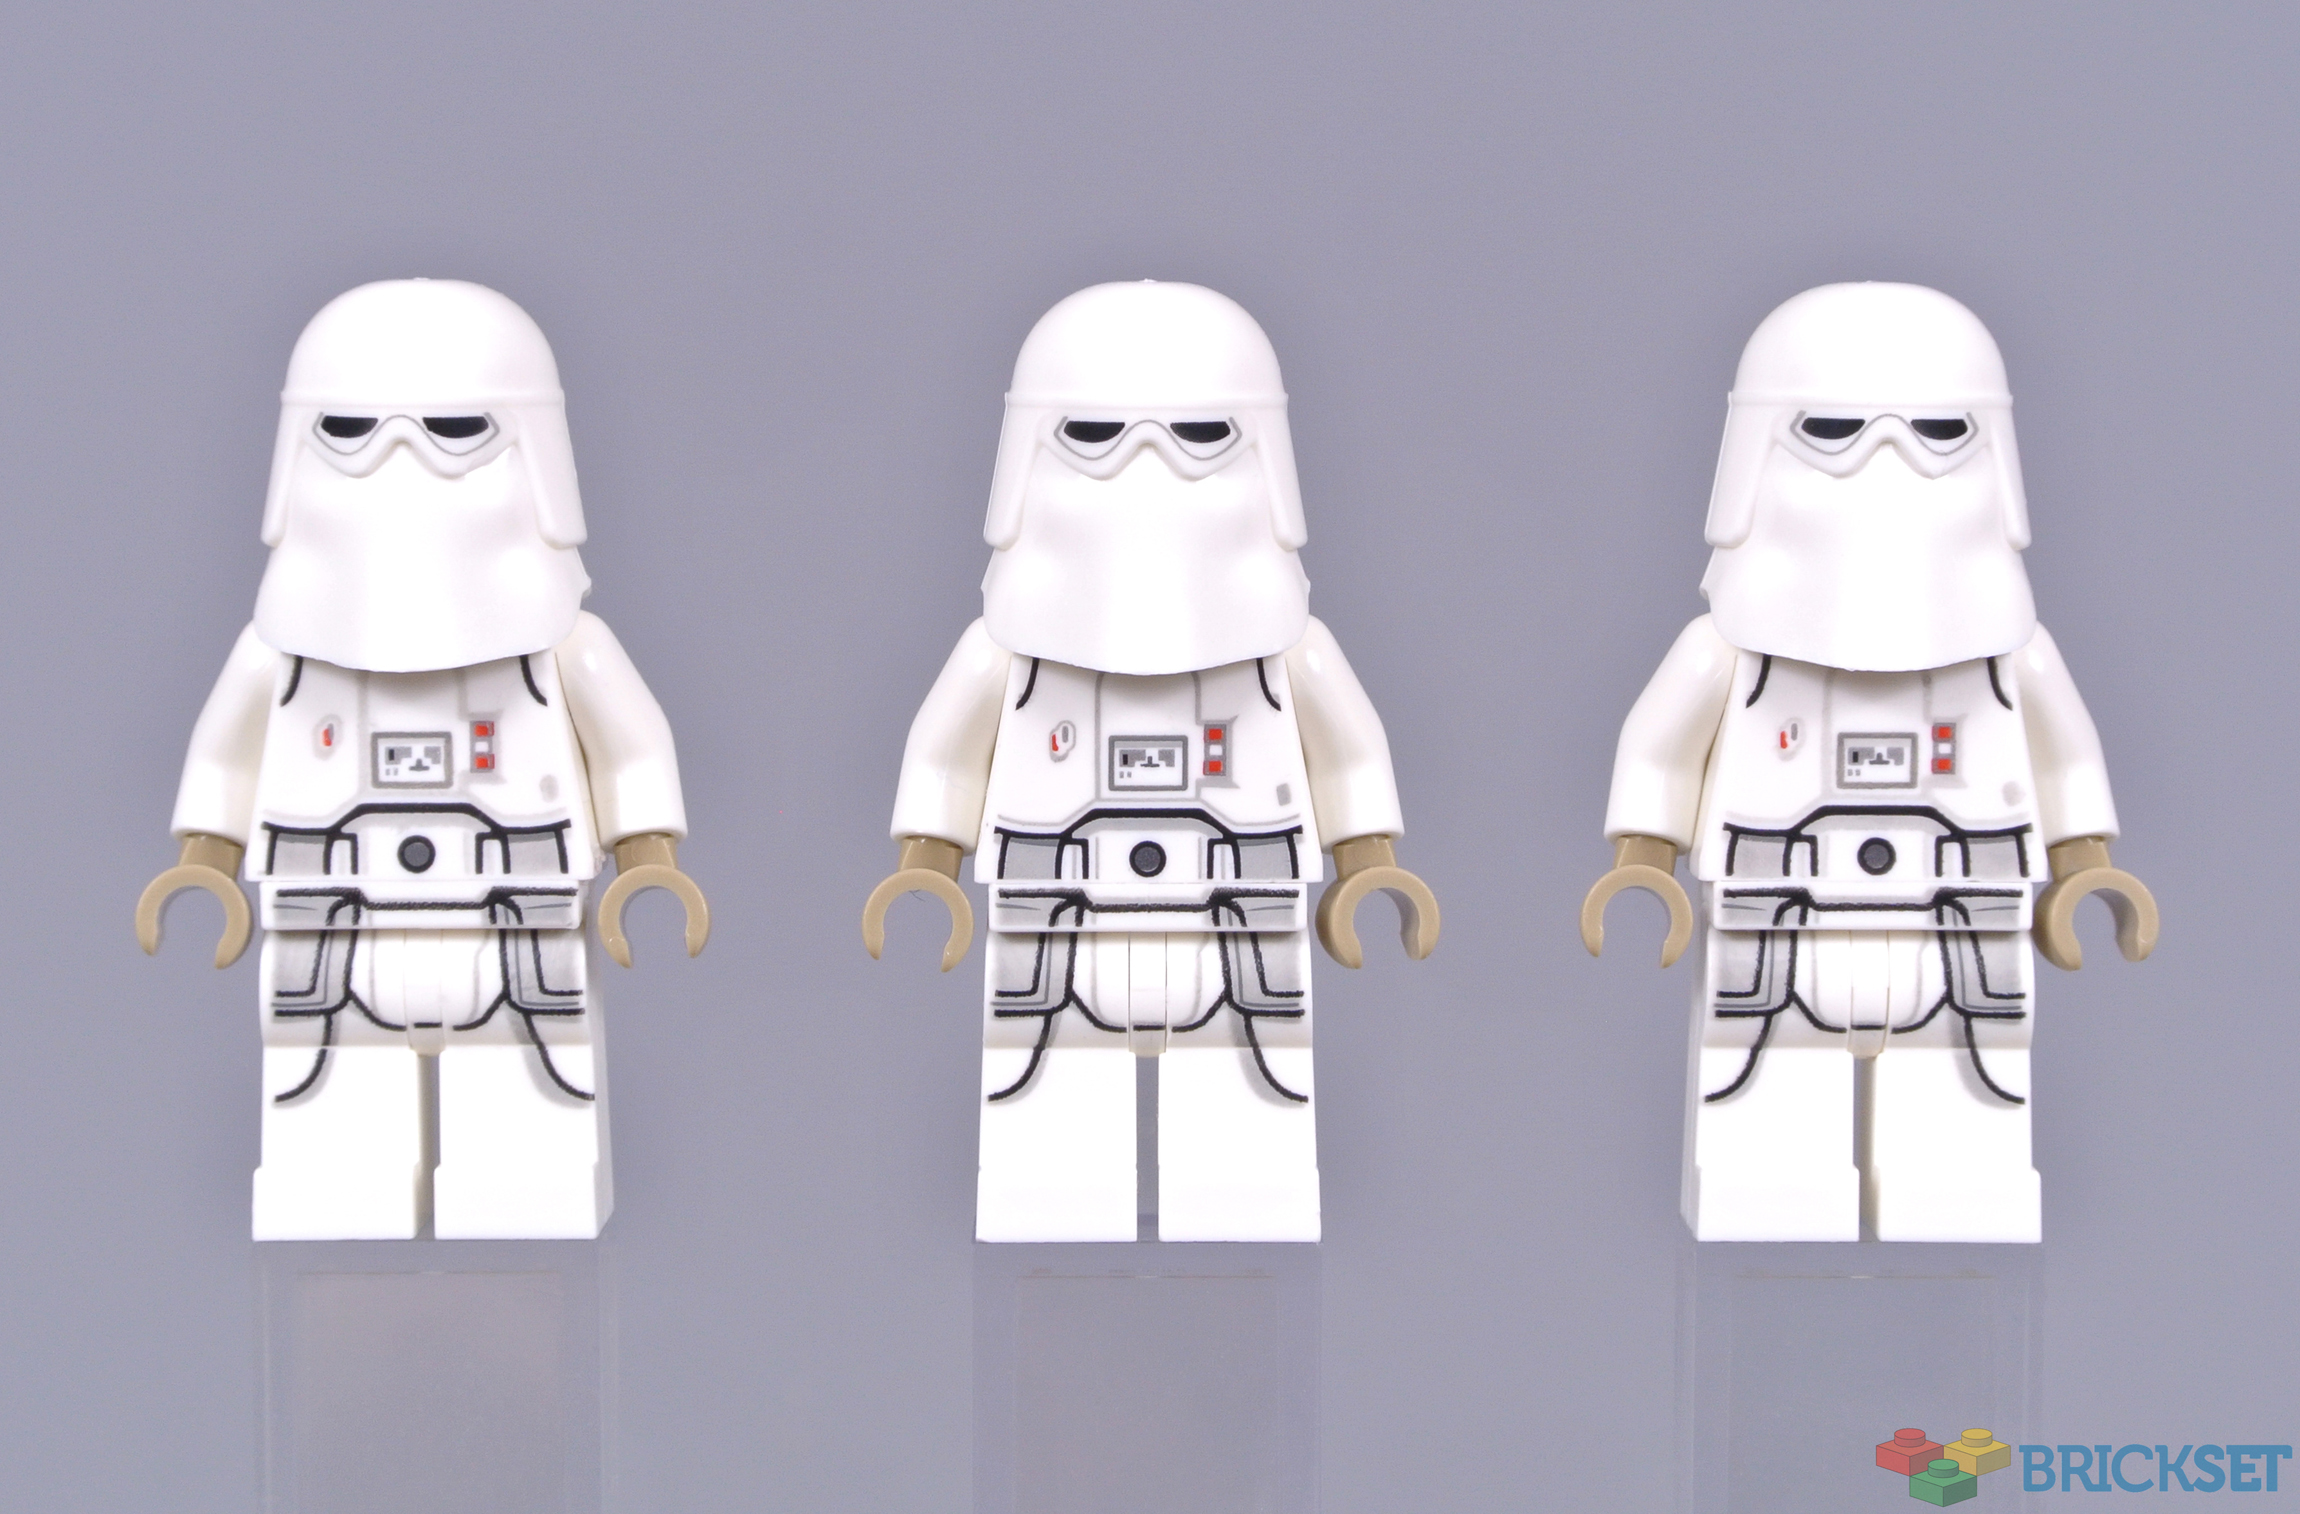 LEGO Star Wars Minifiguren Imperial Snowtrooper Limited Edition 